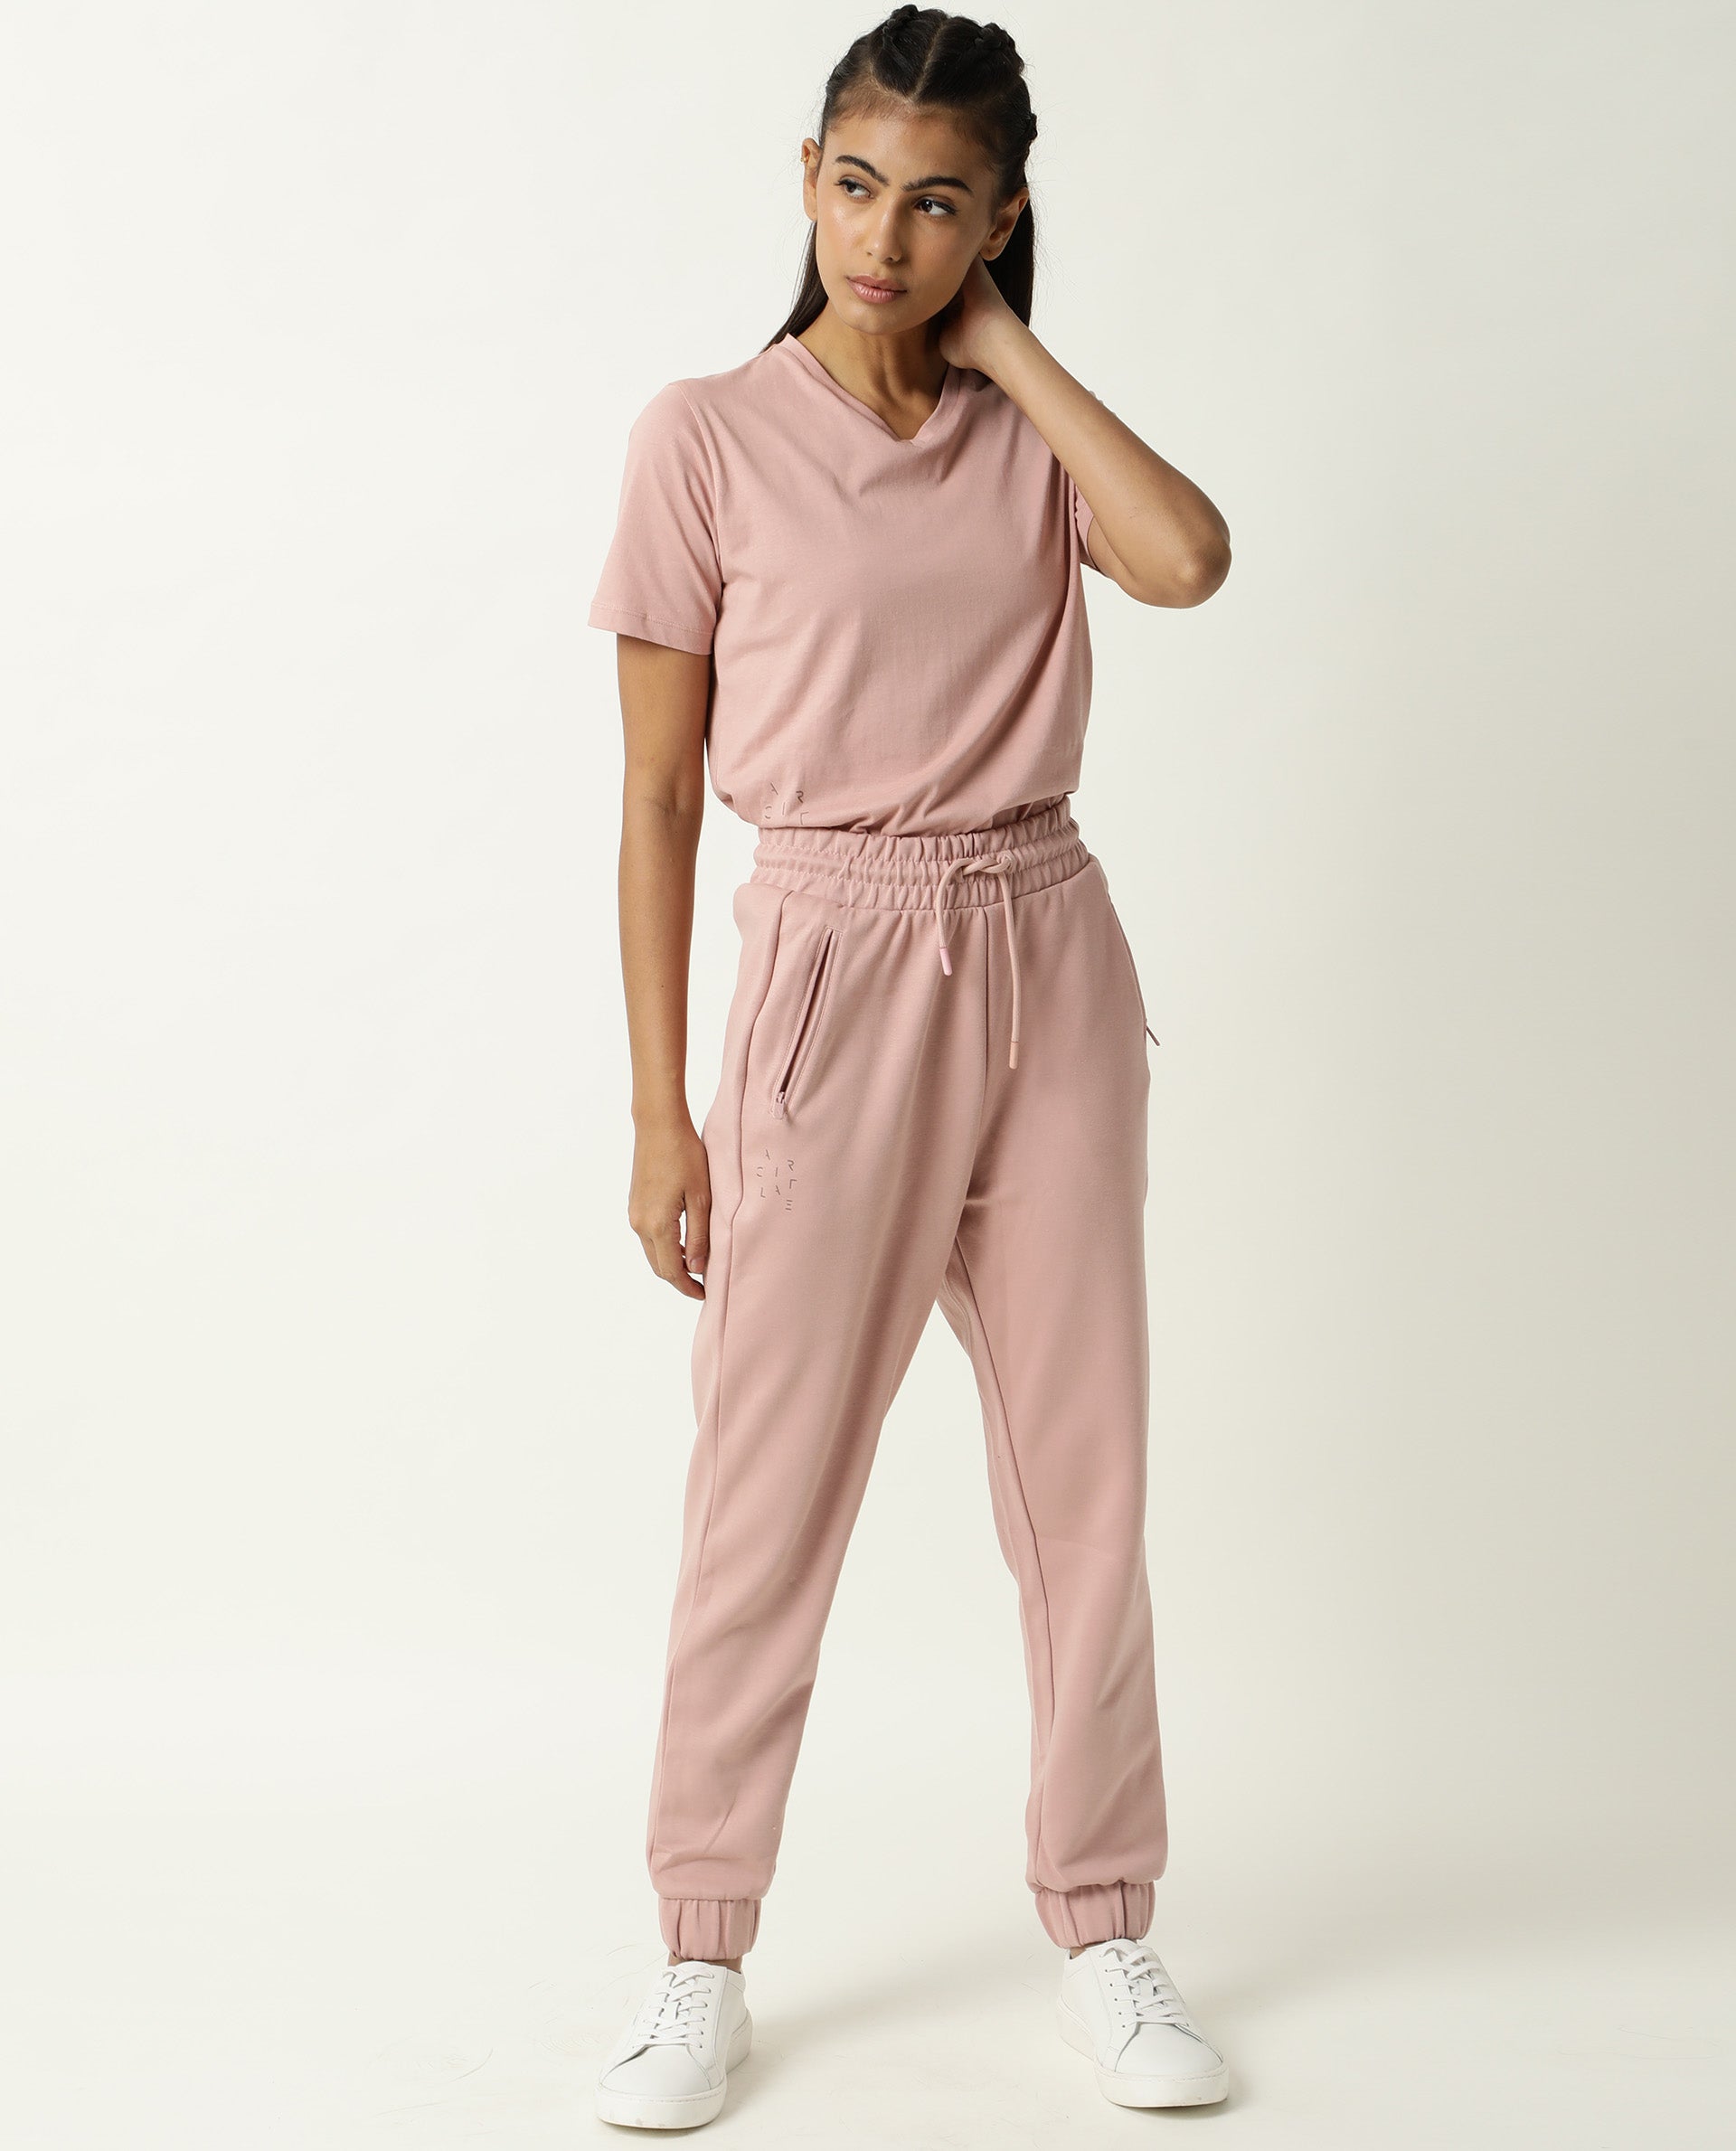 Cotton Half Sleeve T-Shirt & Track Pants Co-Ords Track Suit Set for Women  and Girls